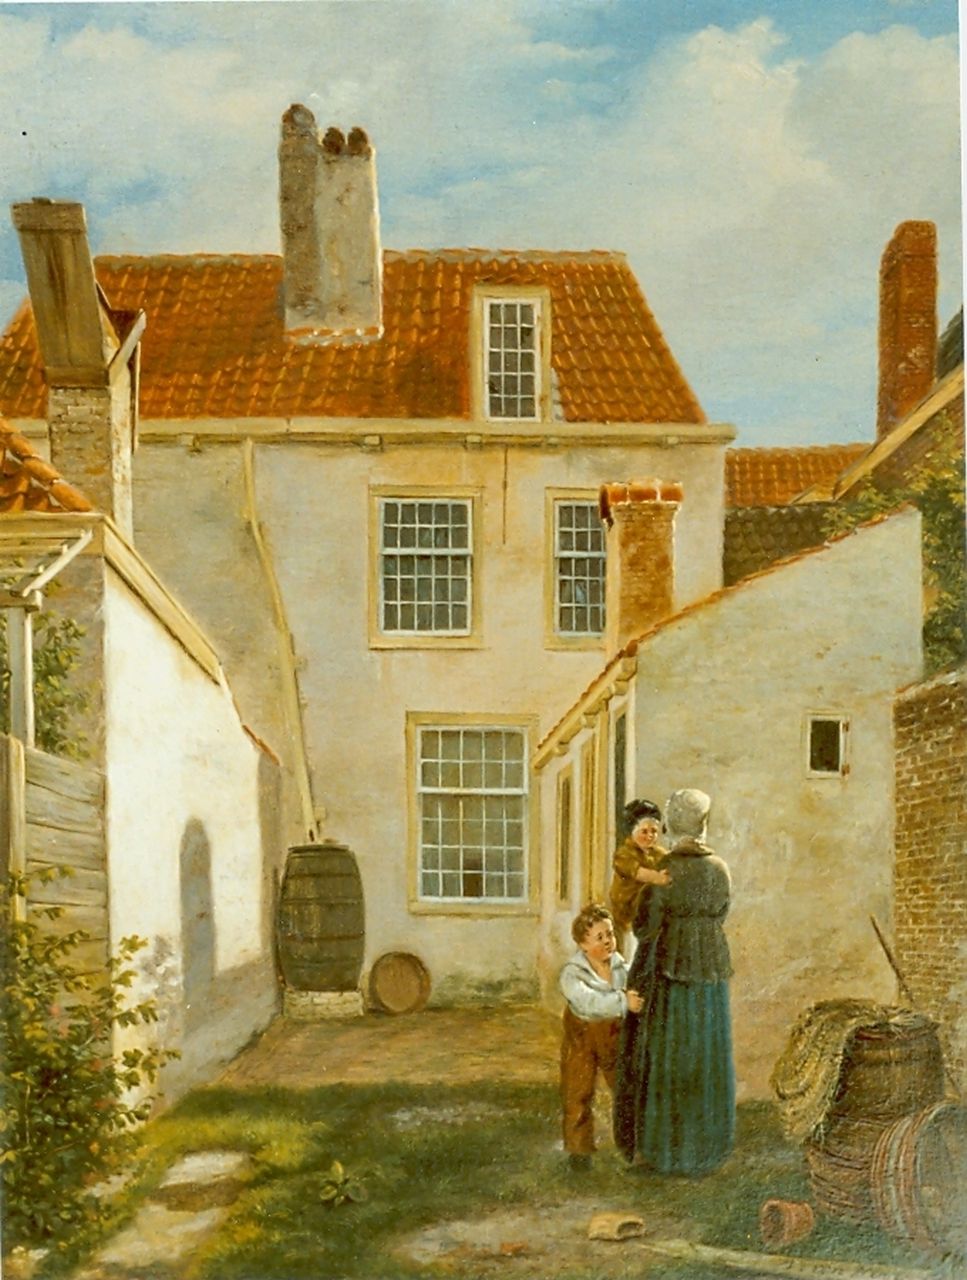 Hove B.J. van | Bartholomeus Johannes 'Bart' van Hove, Mother with two children in a court yard, oil on panel 29.0 x 23.0 cm, signed l.r.